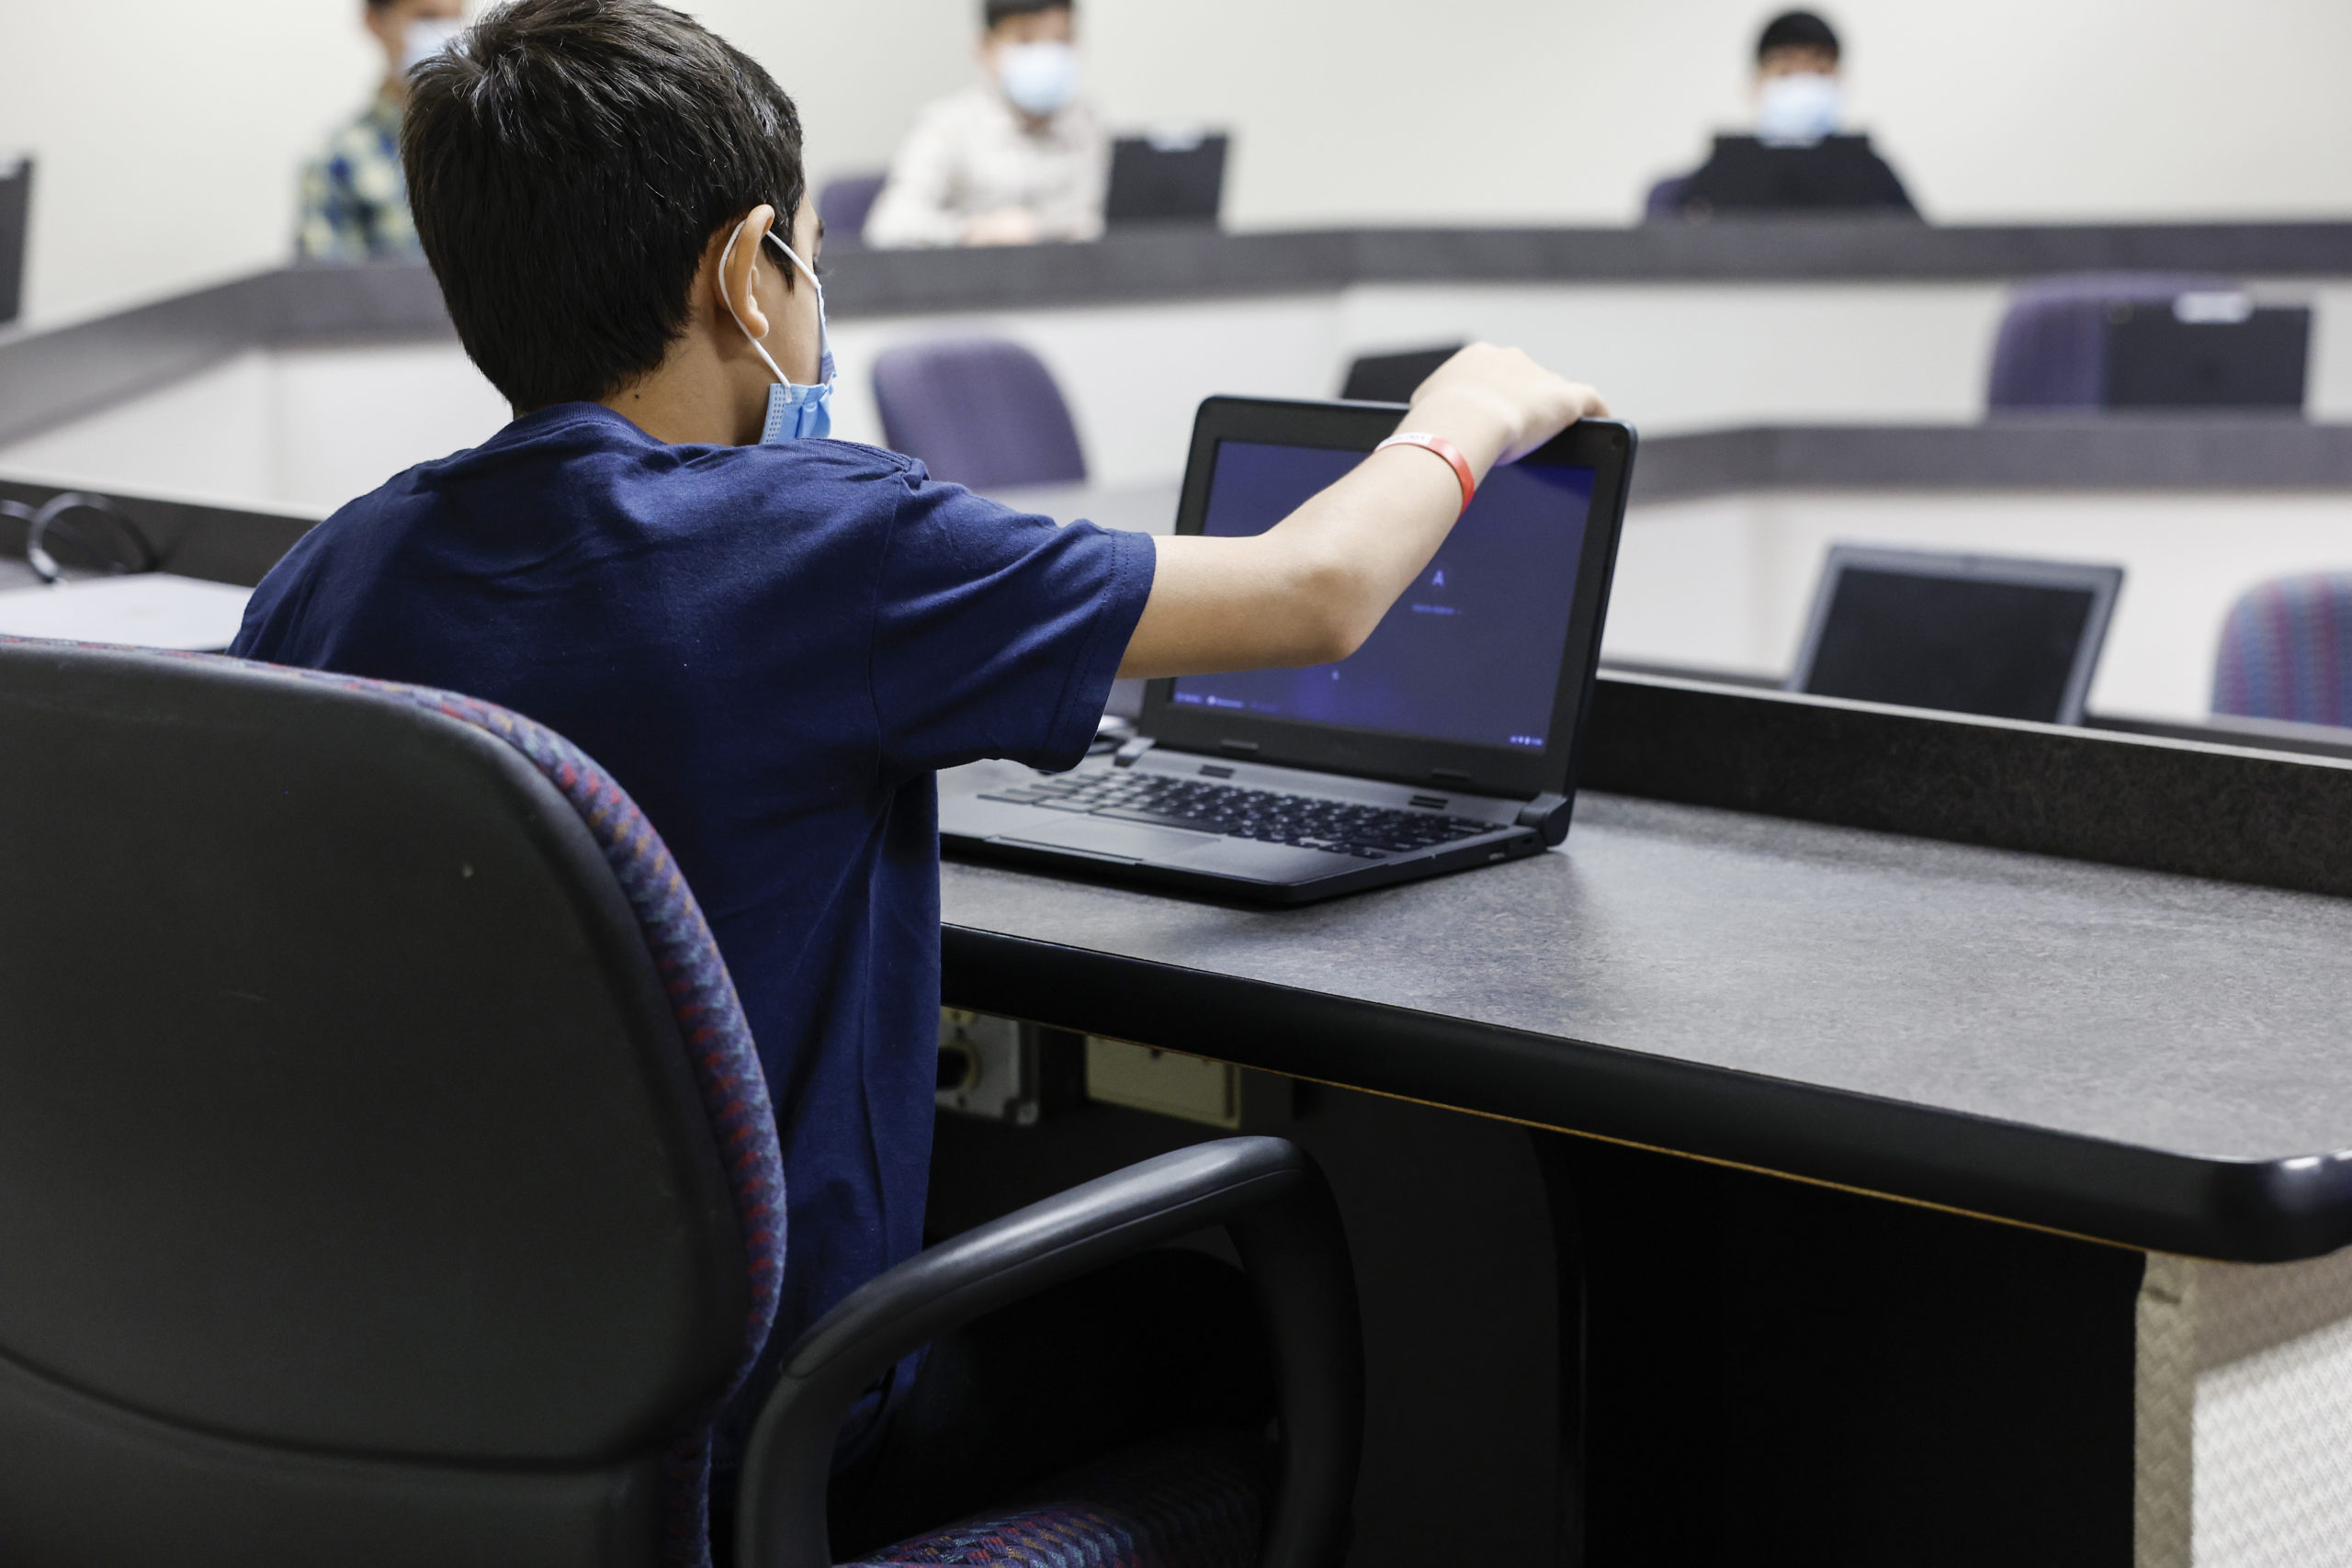 A young Afghan boy looks at a laptop in a computer classroom in the National Conference Center (NCC), which in recent months has been redesigned to temporarily house Afghan nationals on August 11, 2022 in Leesburg, Virginia. Operation Allies Welcome an initiative coordinated by both the Department of Defense and U.S. Department of Homeland Security, has turned the NCC into a hotel like location where Afghan nationals who recently left Afghanistan can begin the process of resettling in the United States. This action is part of the organizations second phase in relocating vulnerable Afghan refugees, since the Taliban retook control of the government in Afghanistan. (Photo by Anna Moneymaker/Getty Images)